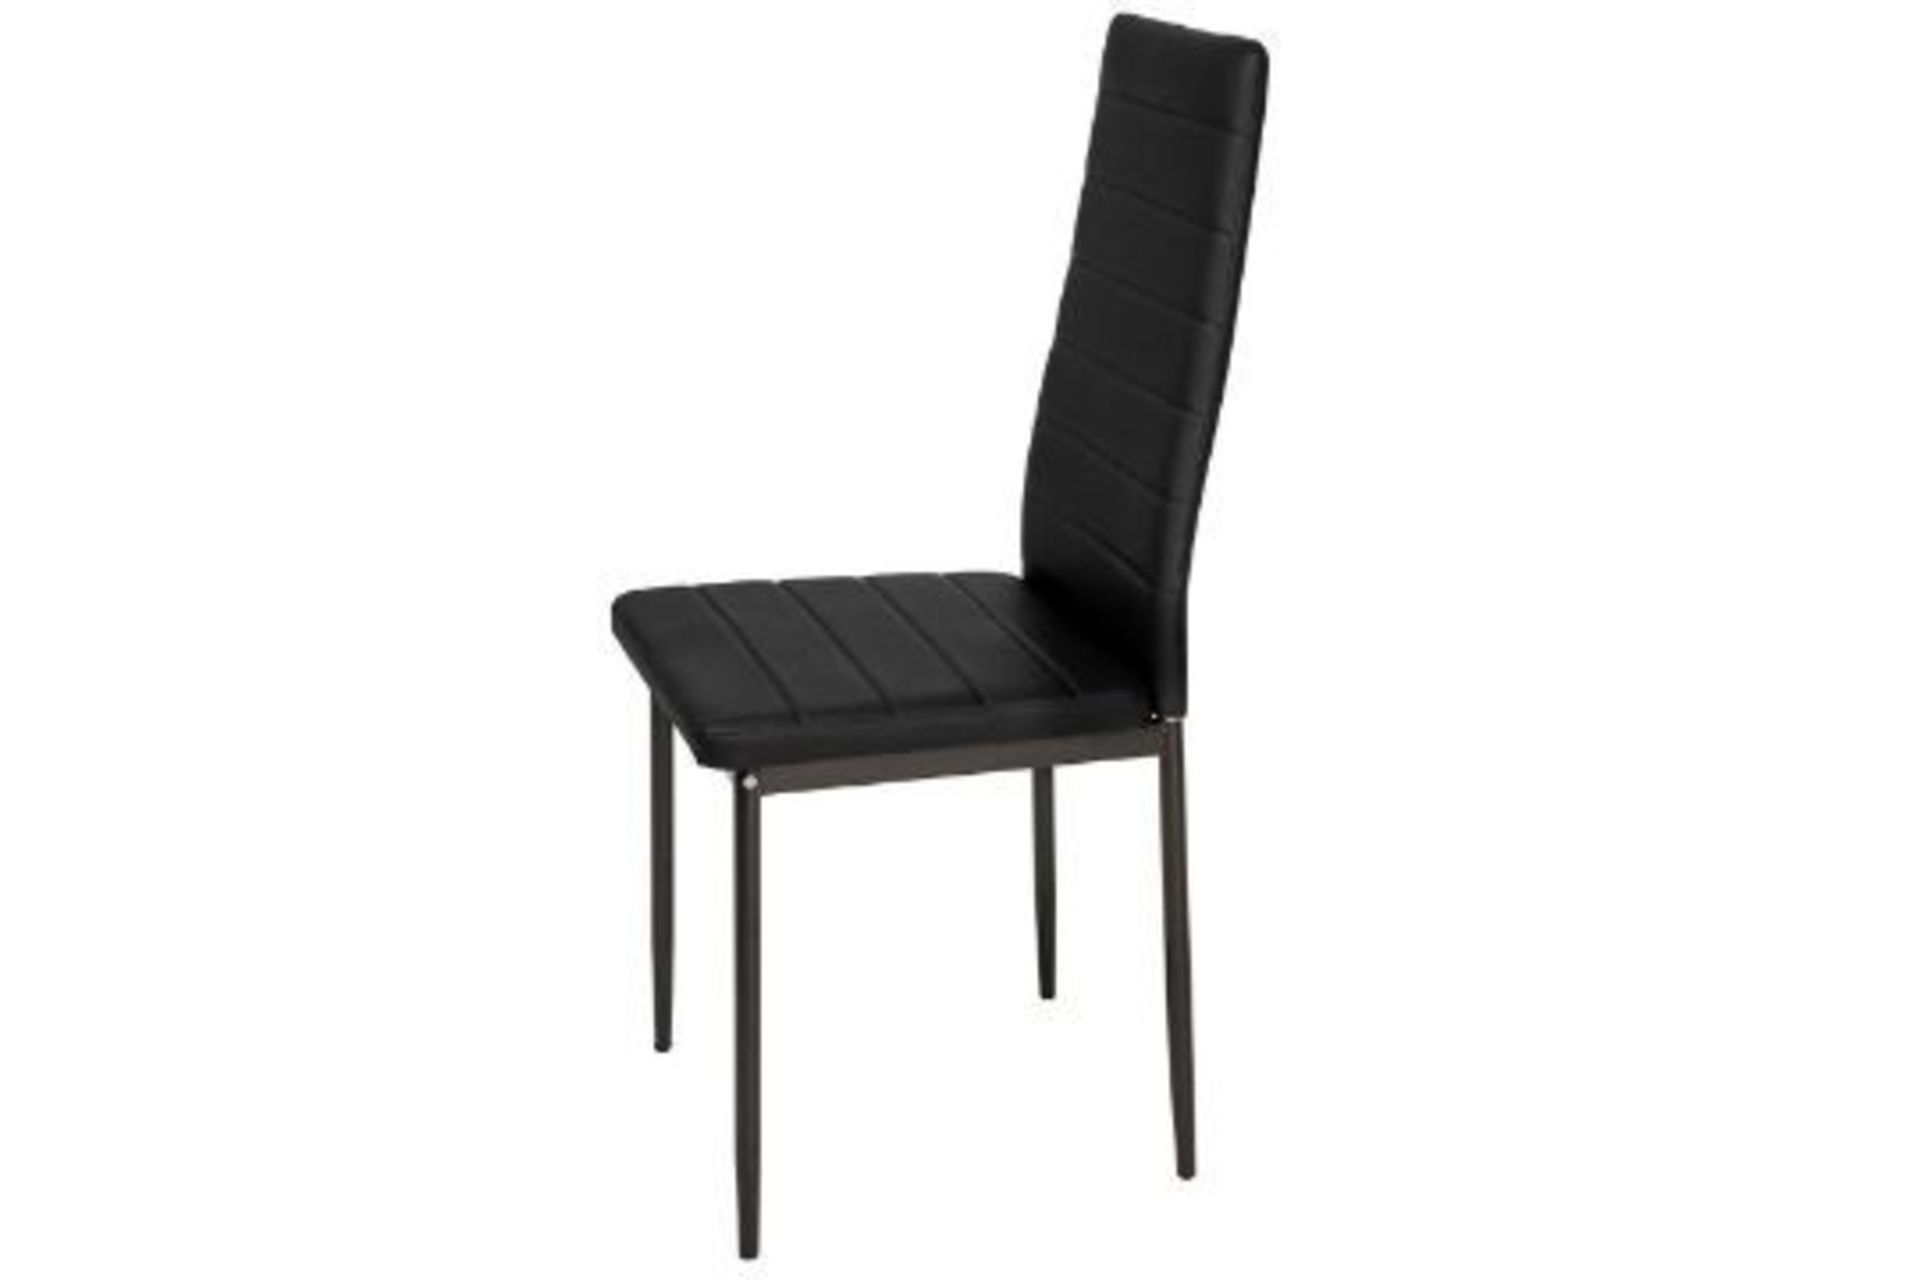 PALLET TO CONTAIN 24 X NEW BOXED Modern Synthetic Leather Dining Chairs In Black. RRP £99.99 each, - Image 3 of 6